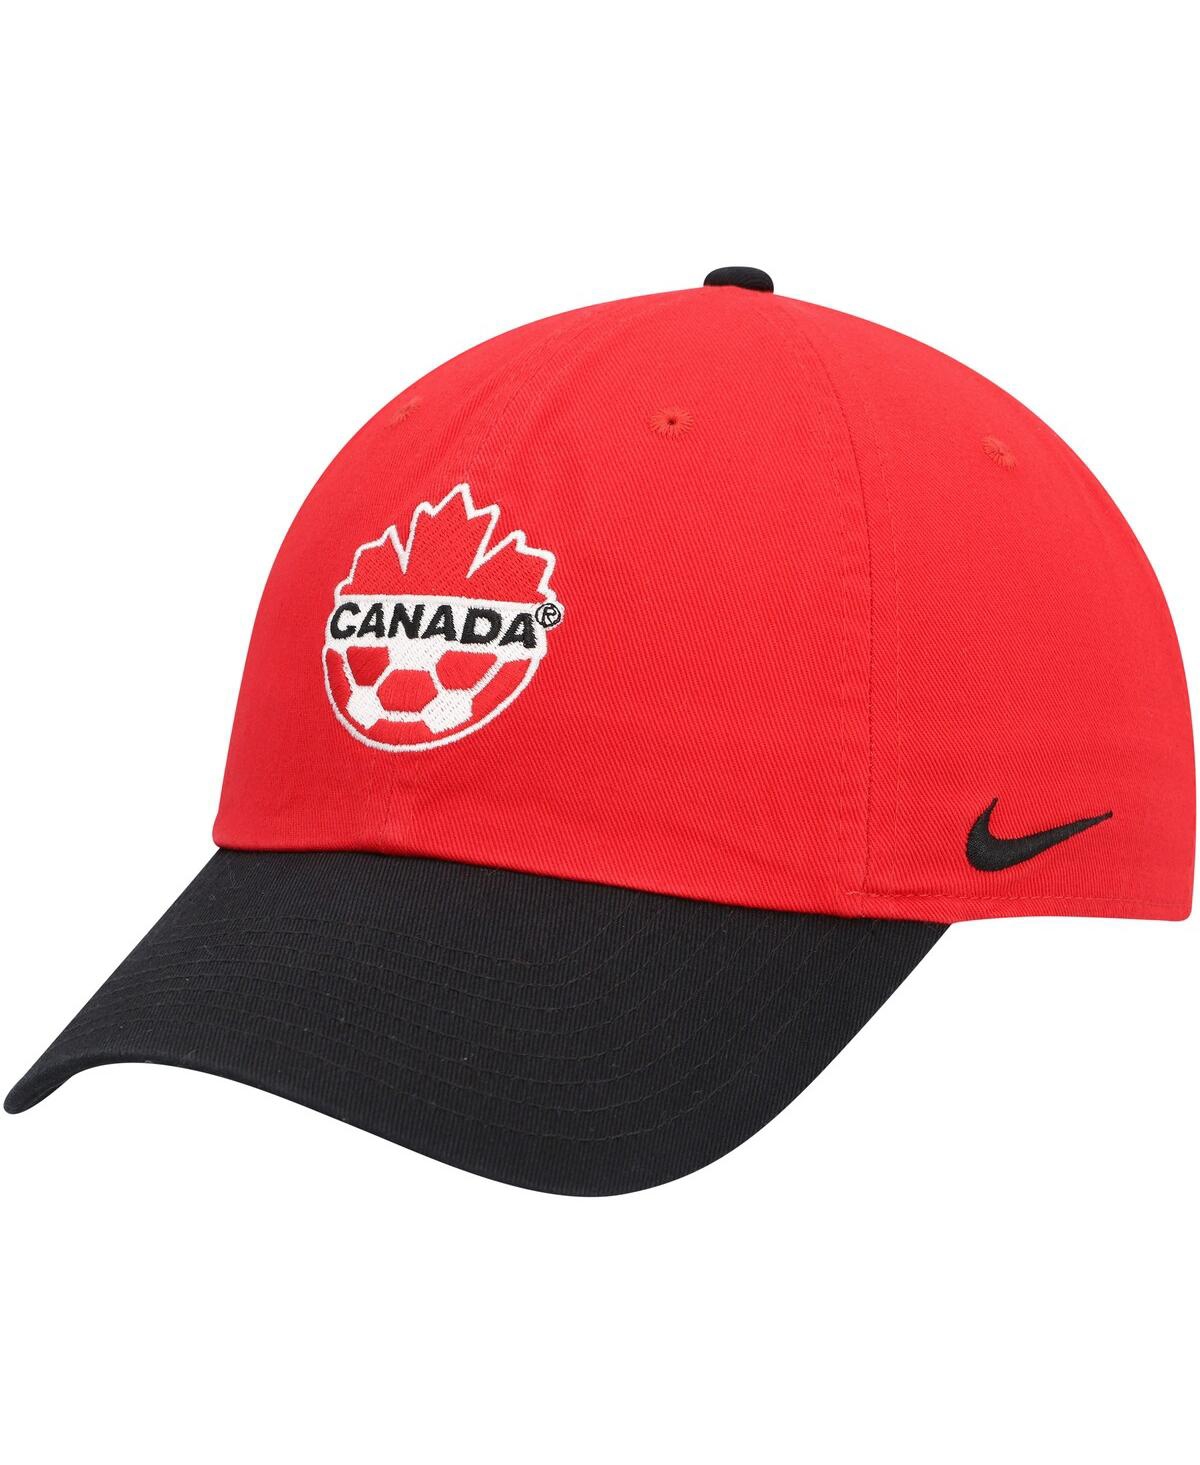 NIKE MEN'S NIKE RED, CHARCOAL CANADA SOCCER CAMPUS ADJUSTABLE HAT